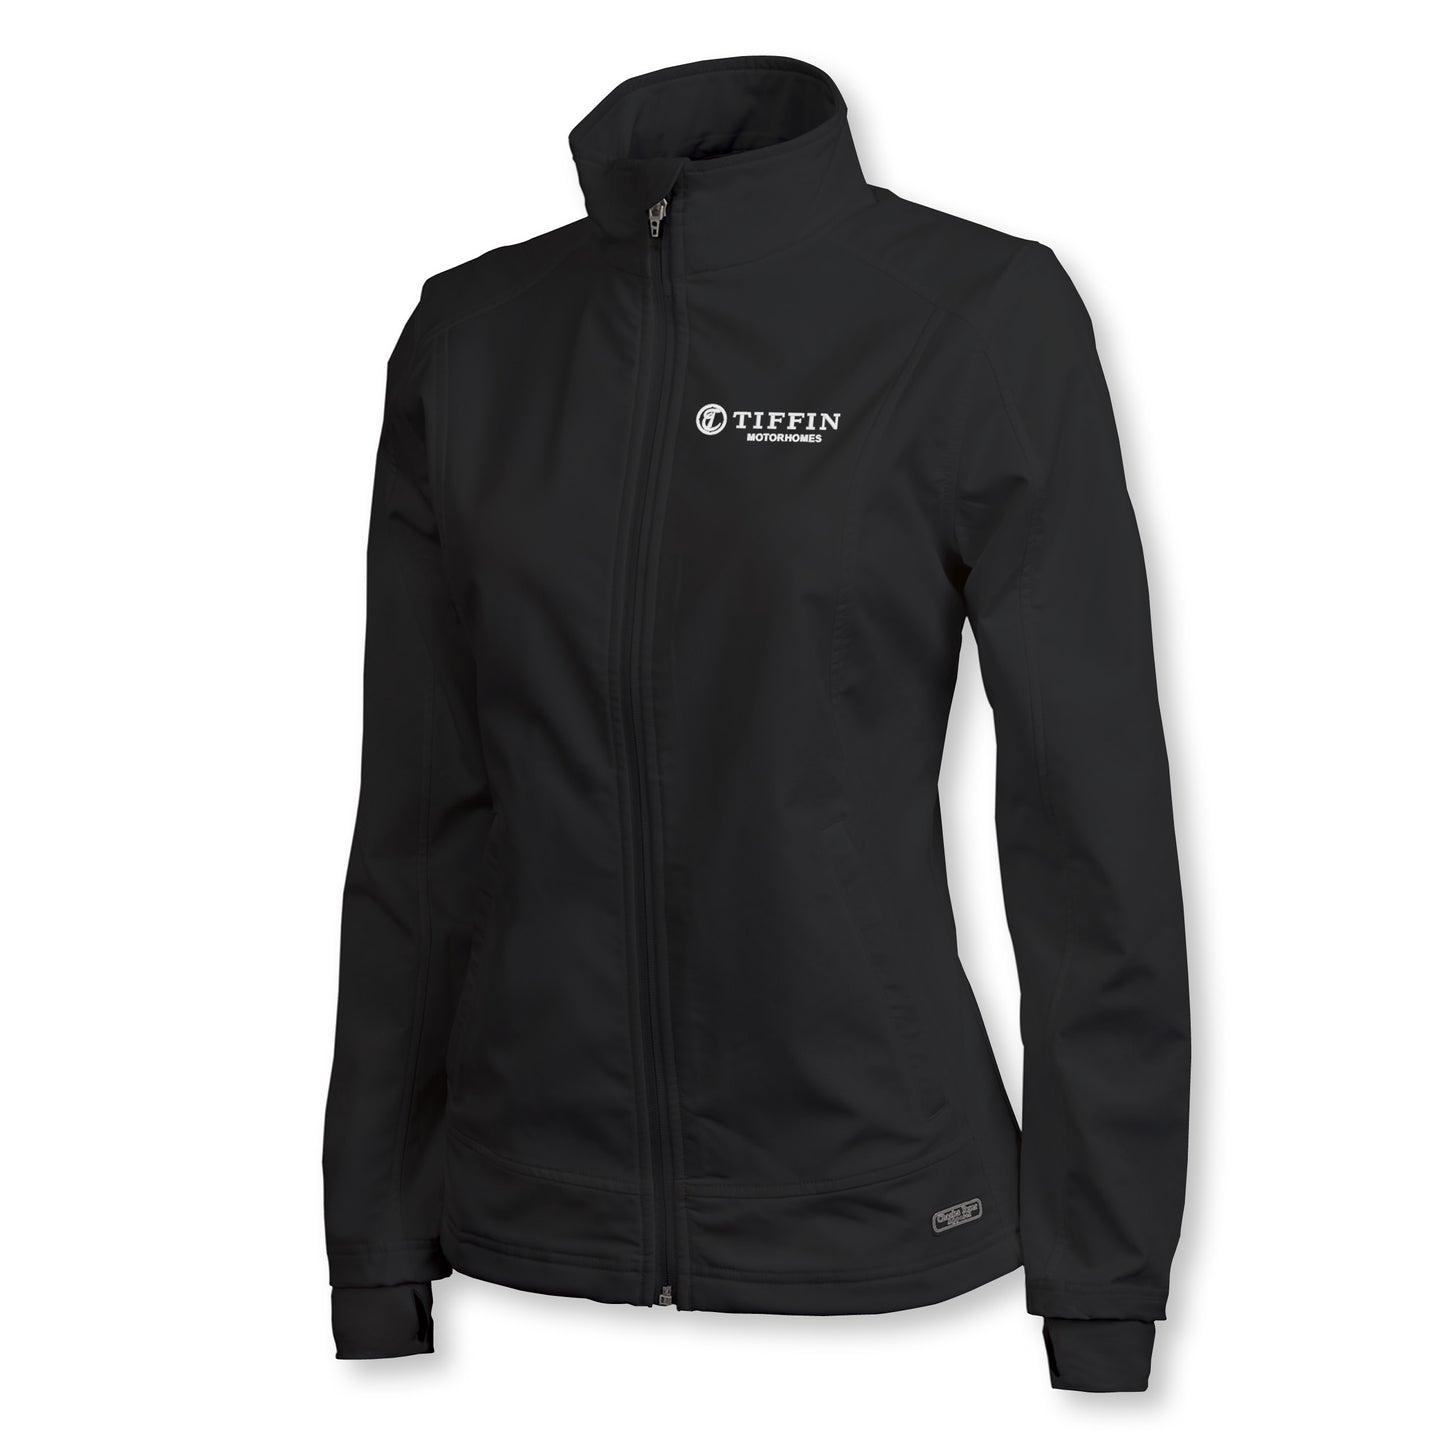 Jacket - Women's Axis Soft Shell